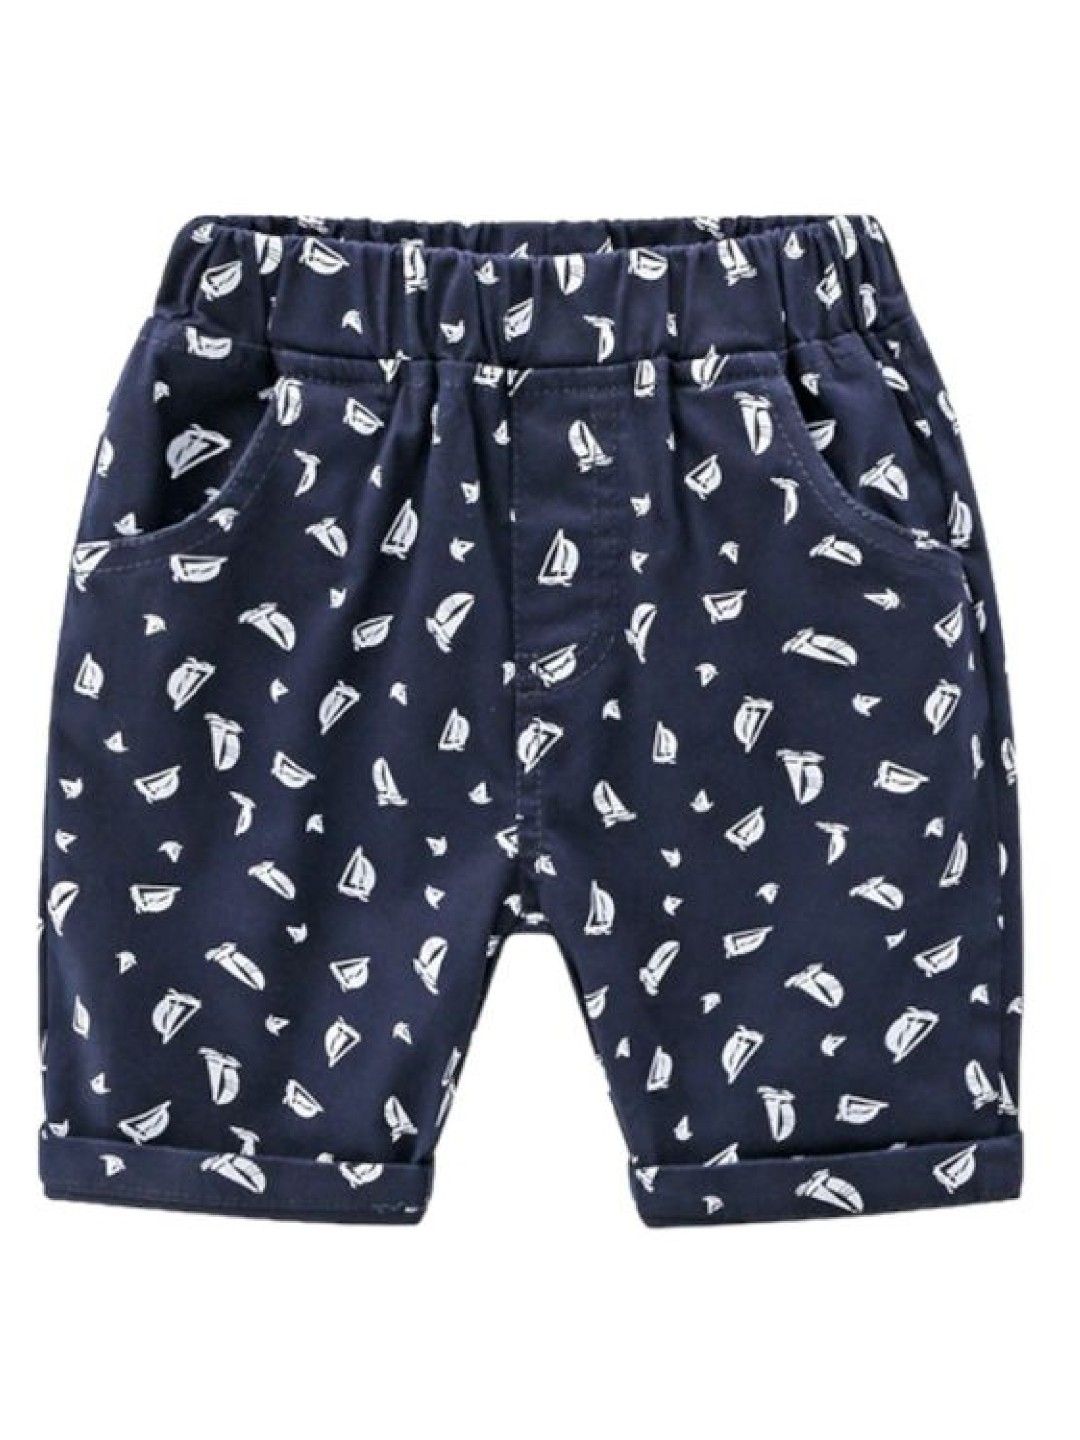 Cottonkind Overall Print Casual Shorts